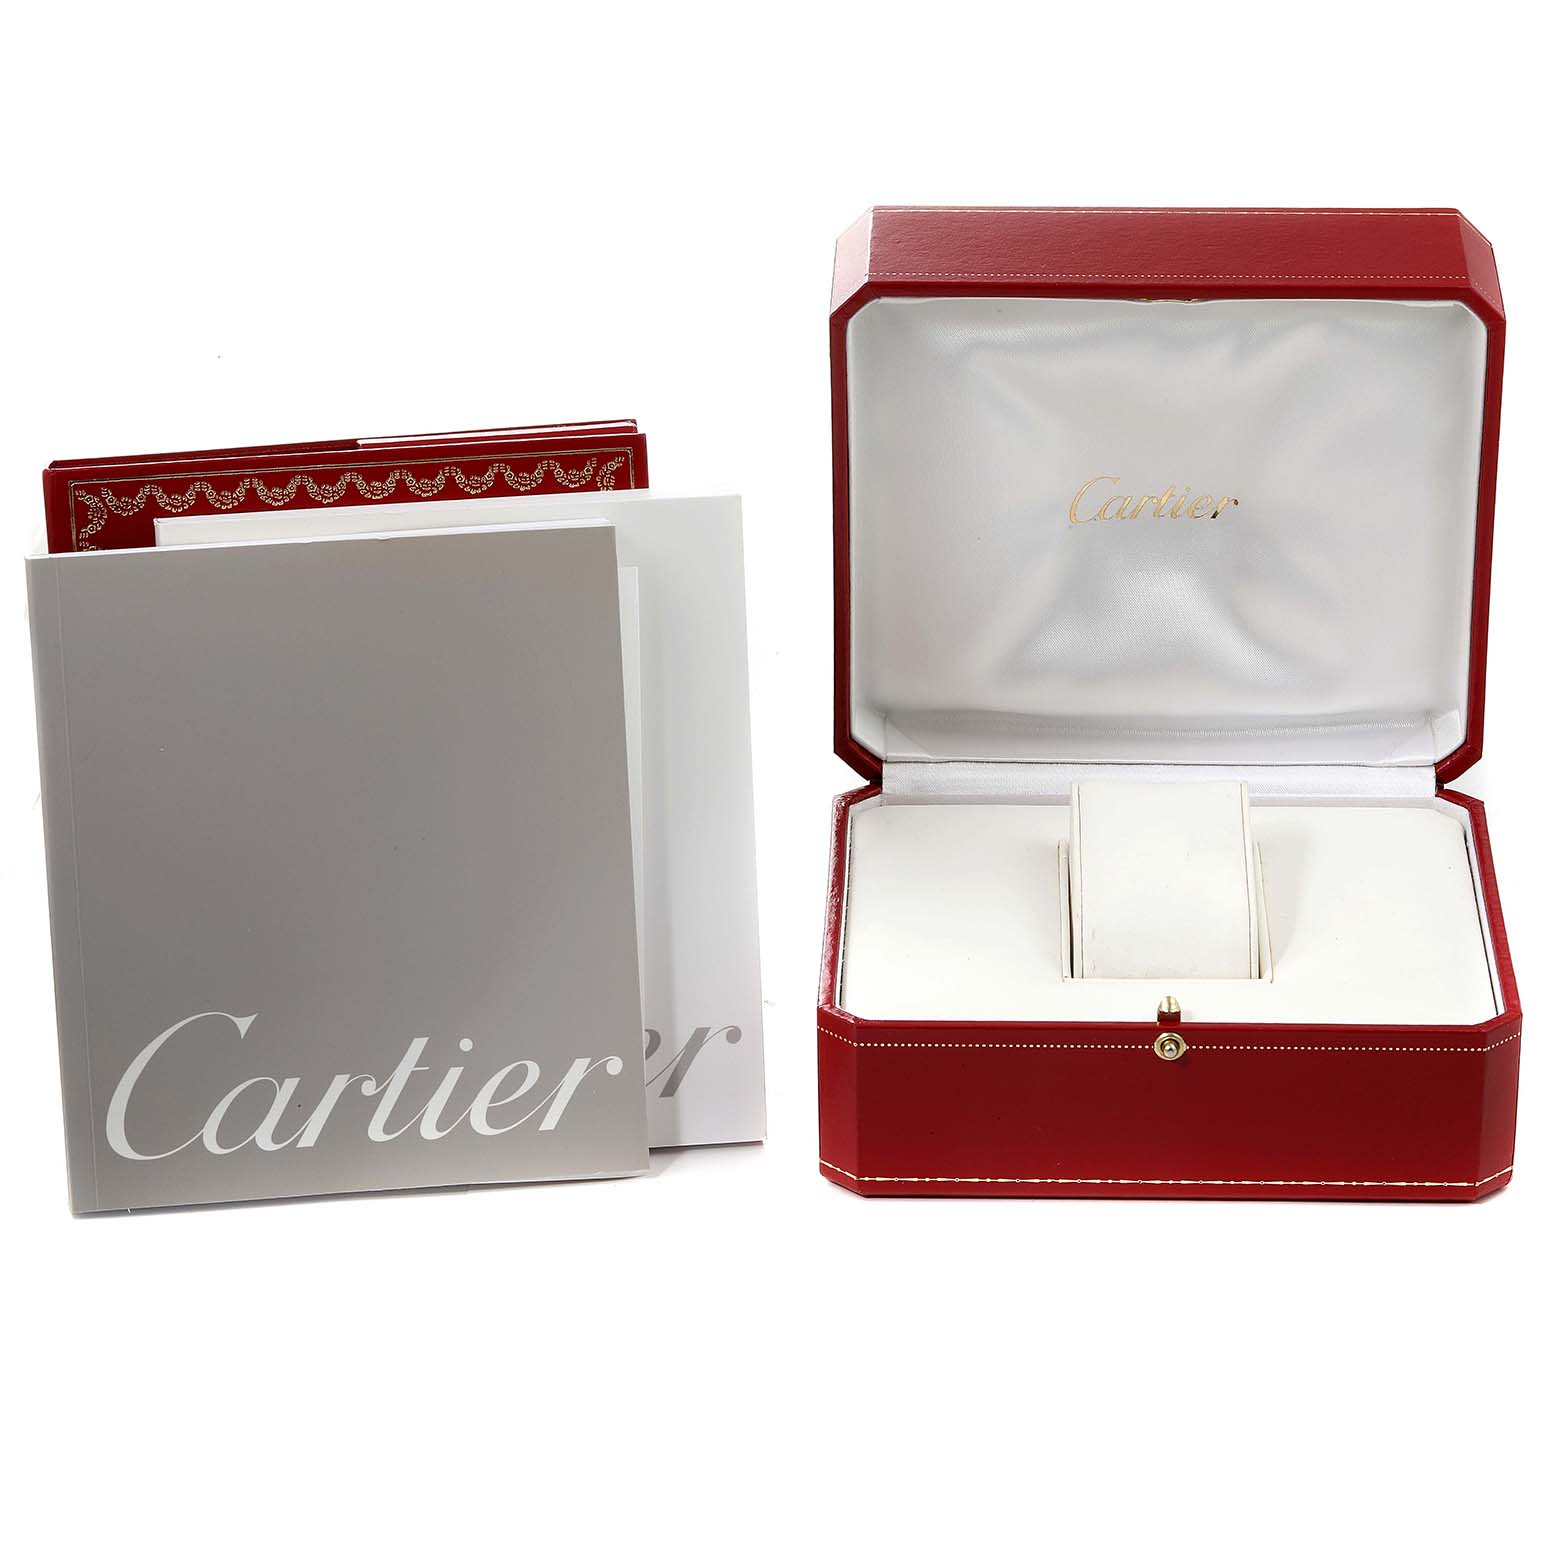 Cartier Tank Francaise Pink Mother of Pearl Steel Watch W51028Q3 Box ...